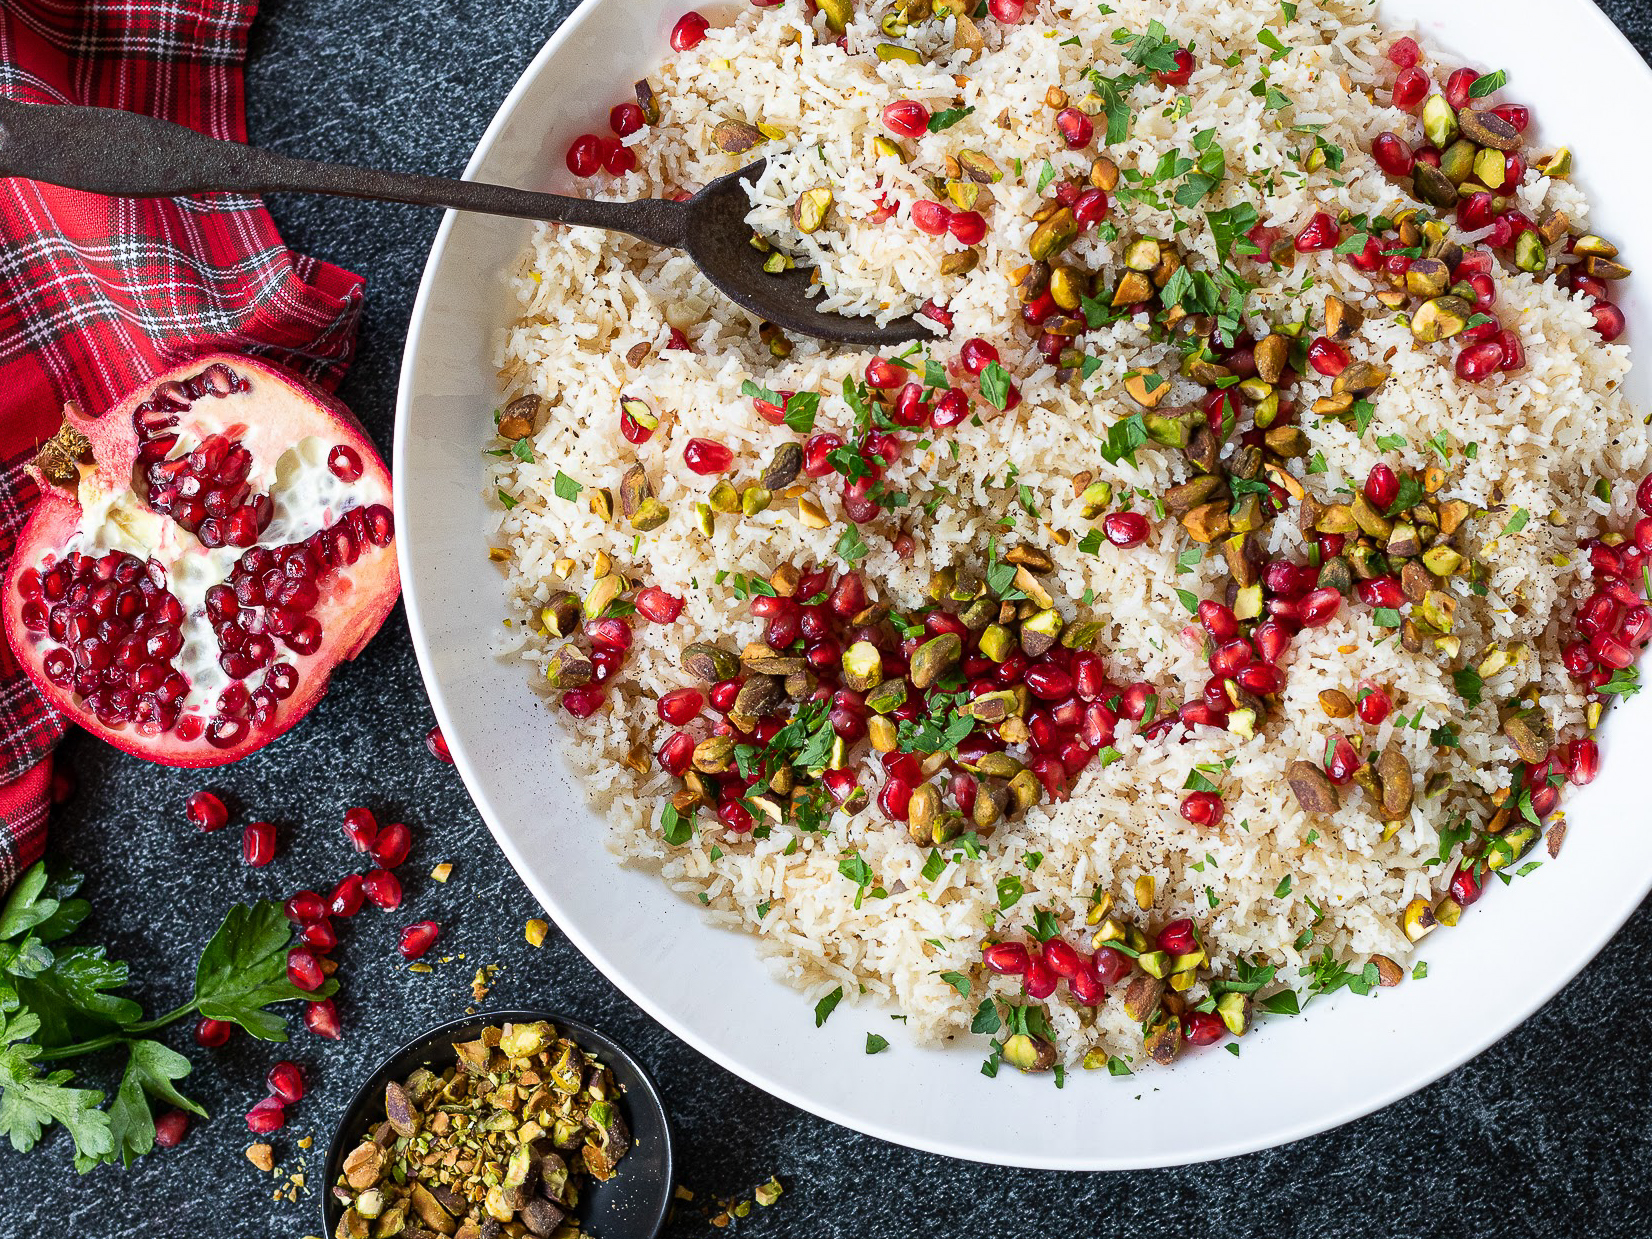 Pomegranate Pistachio Rice Pilaf (Christmas Pilaf) – Save On RiceSelect® At Your Local Publix